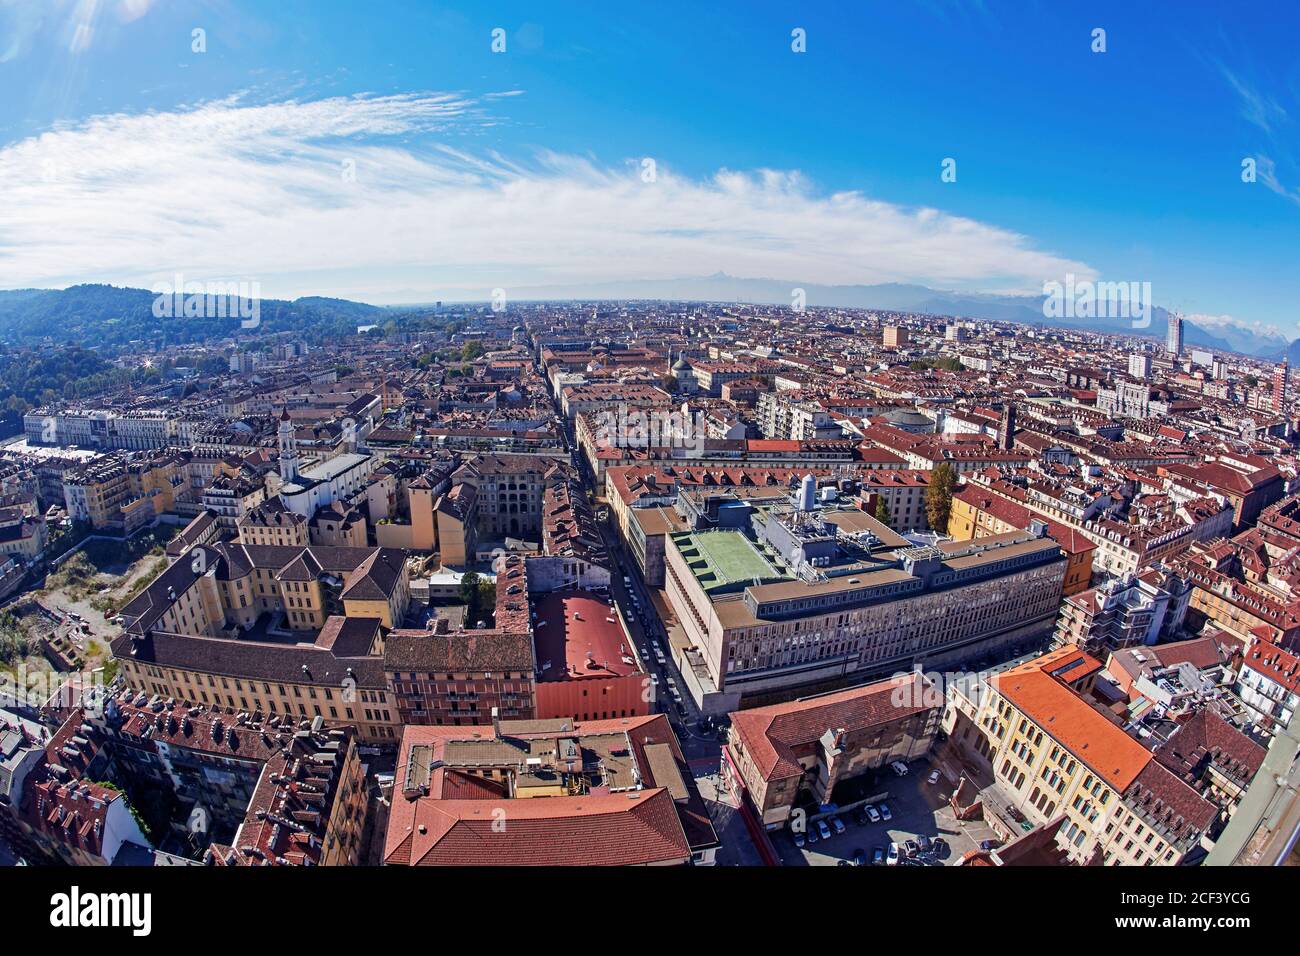 Fish eye Image of the rooftops of Turin, Italy Stock Photo